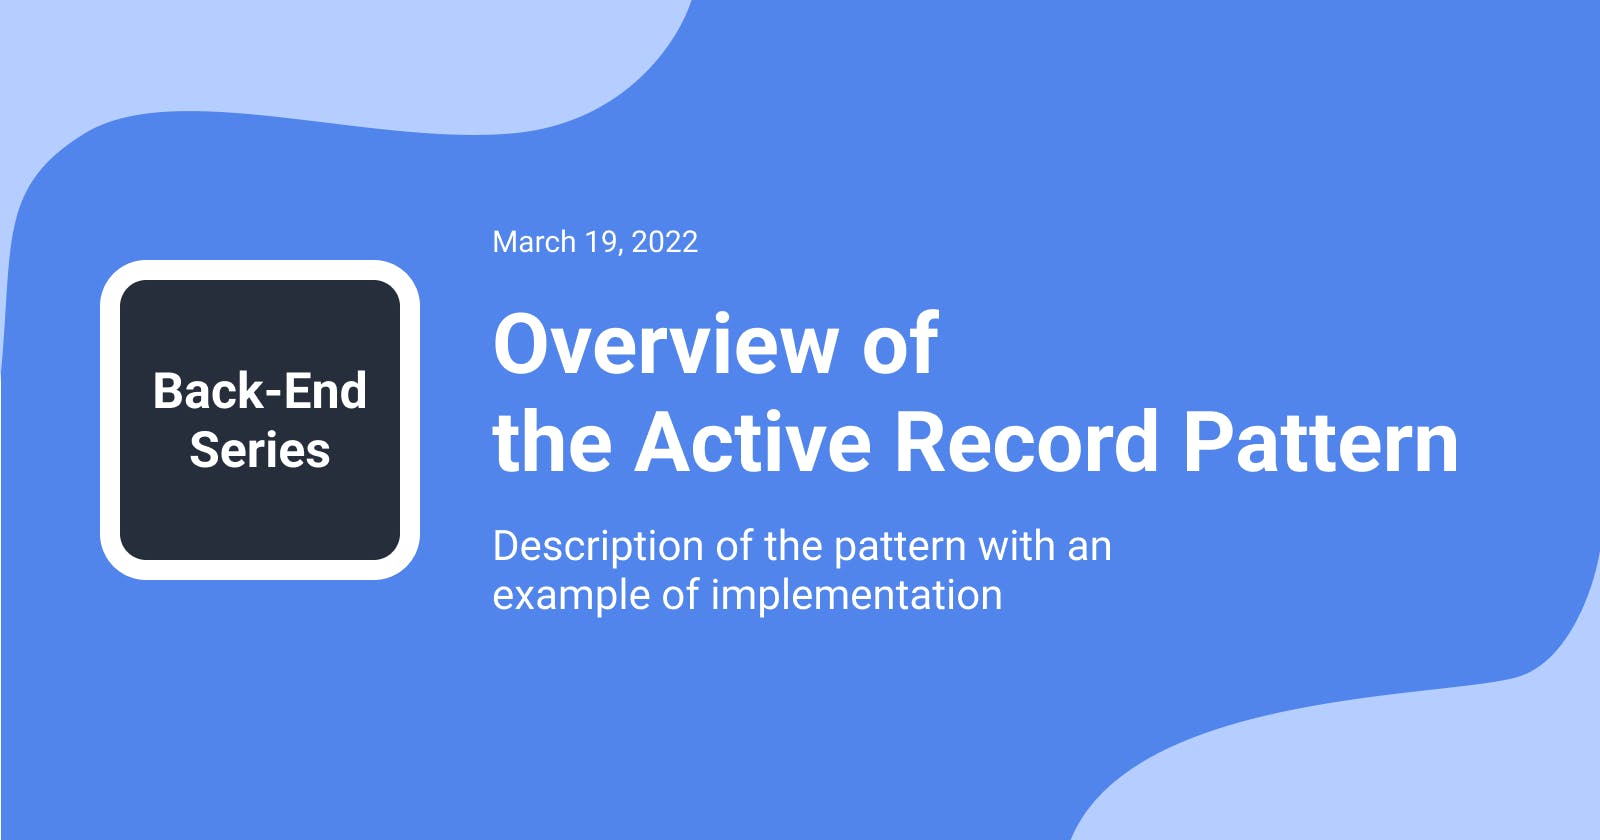 Overview of the Active Record Pattern